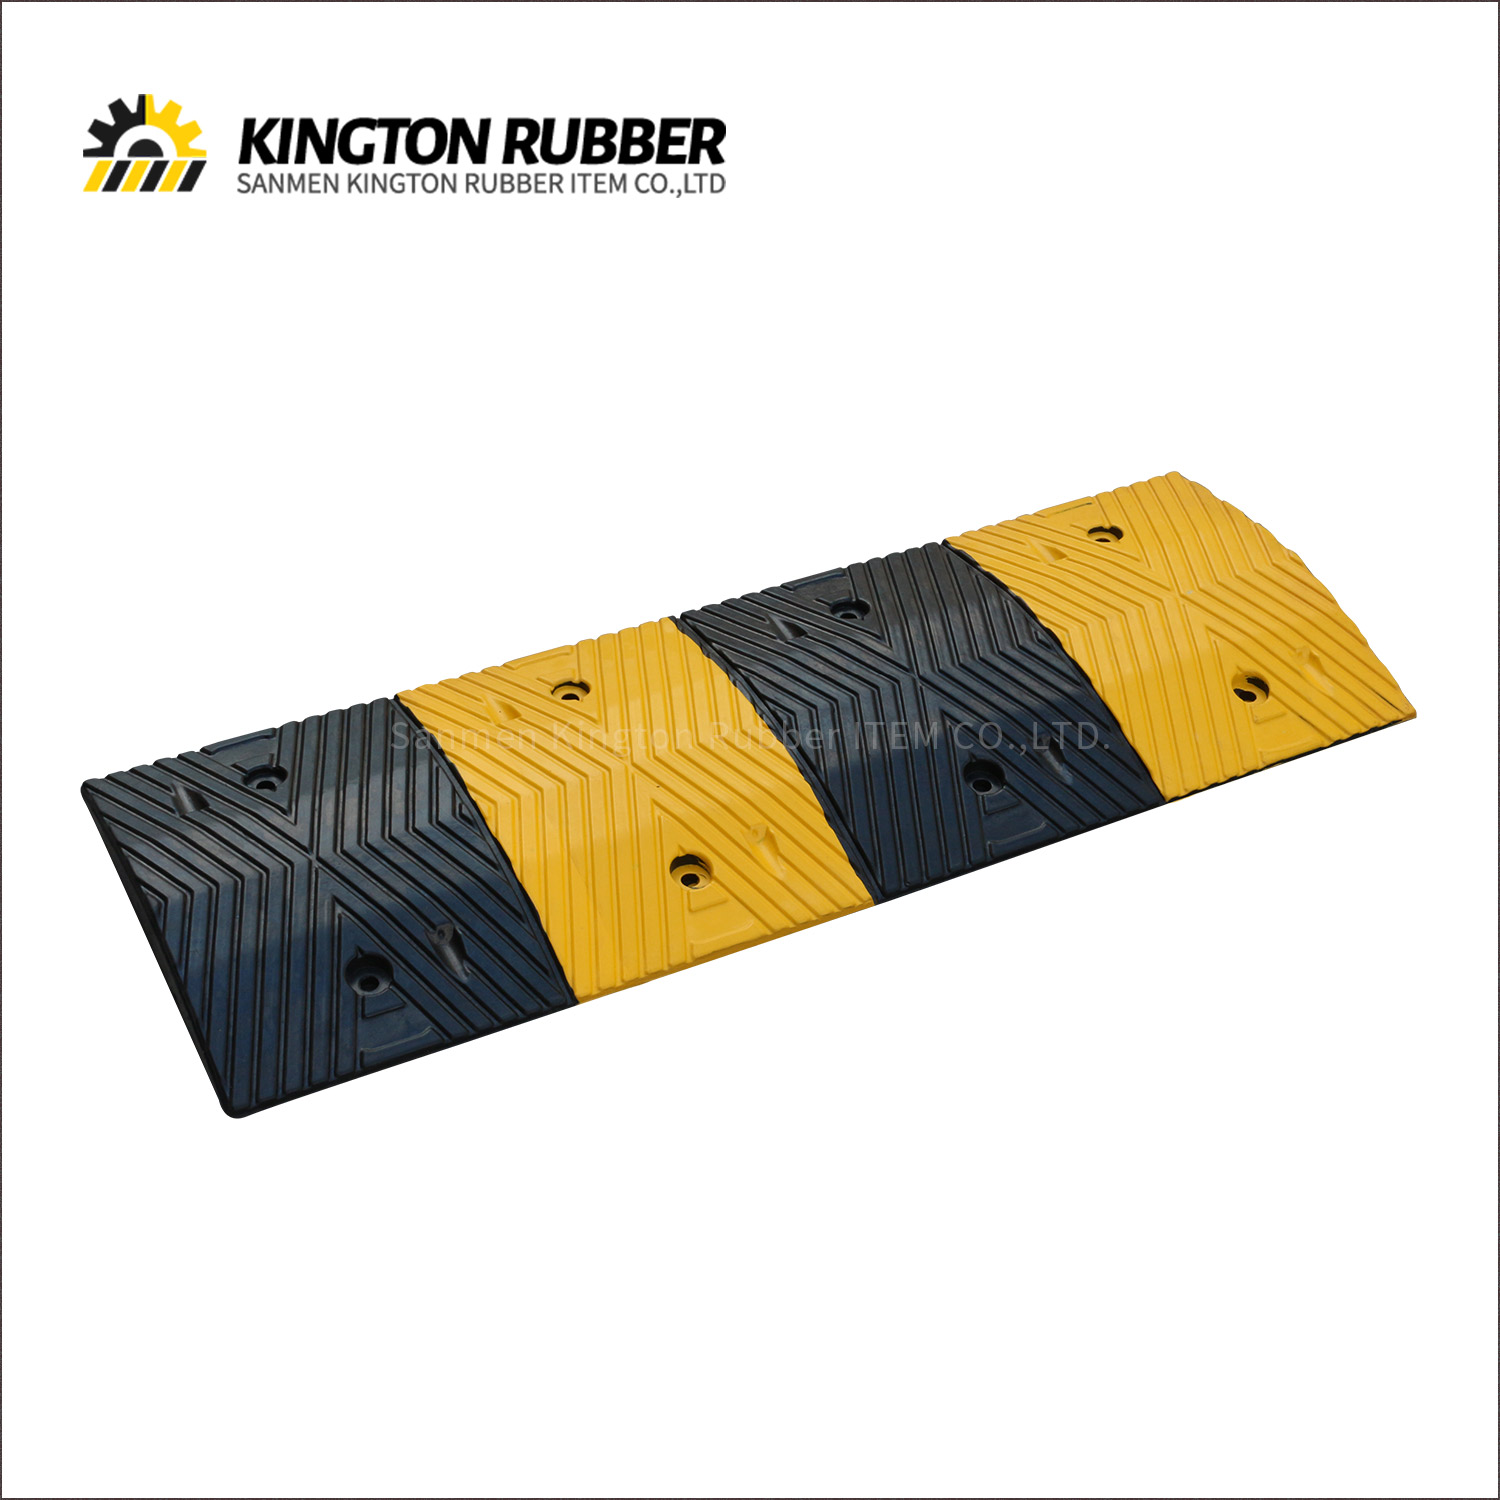 China traffic safety product manufacturer-rubber speed hump